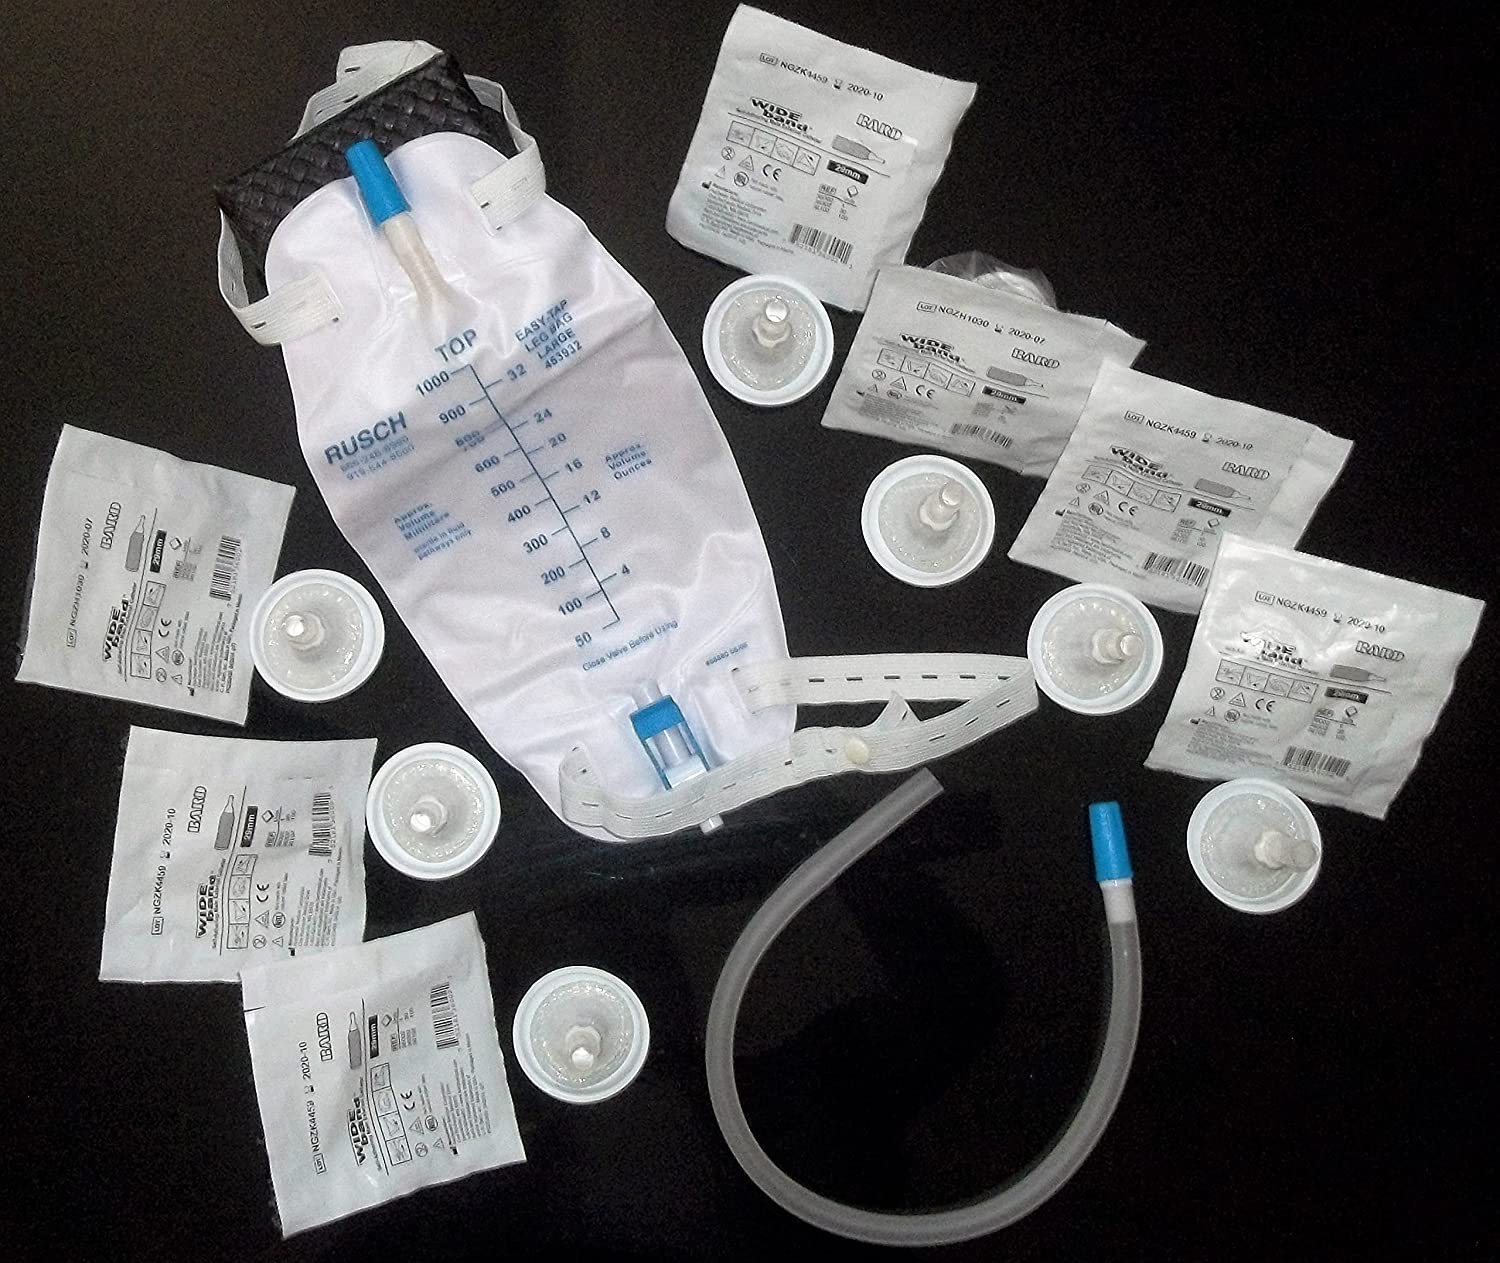 Urinary Kits 1-Week Kits 1-Week Urinary Incontinence Kit (36mm WideBands) by Veteran Medical Supplies online store selling catheters, drainage bags, urinary kits centrally located in Kansas City Missouri shipping to the entire United States